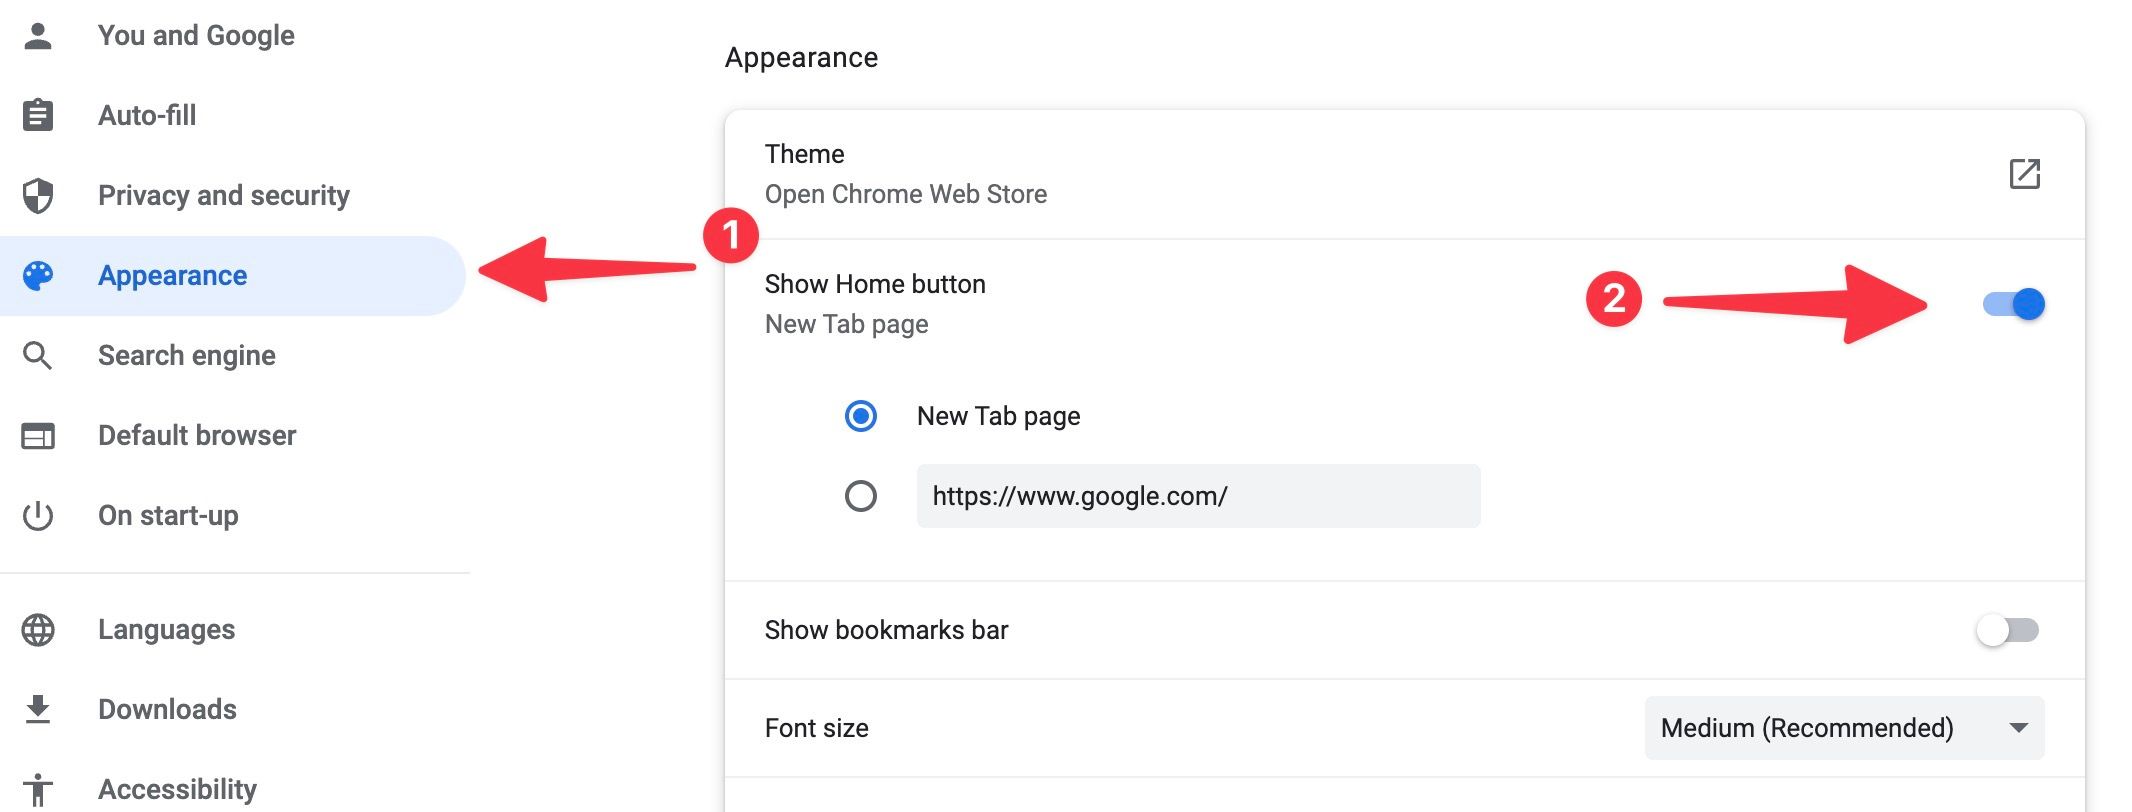 How to Add the Home Button to Google Chrome